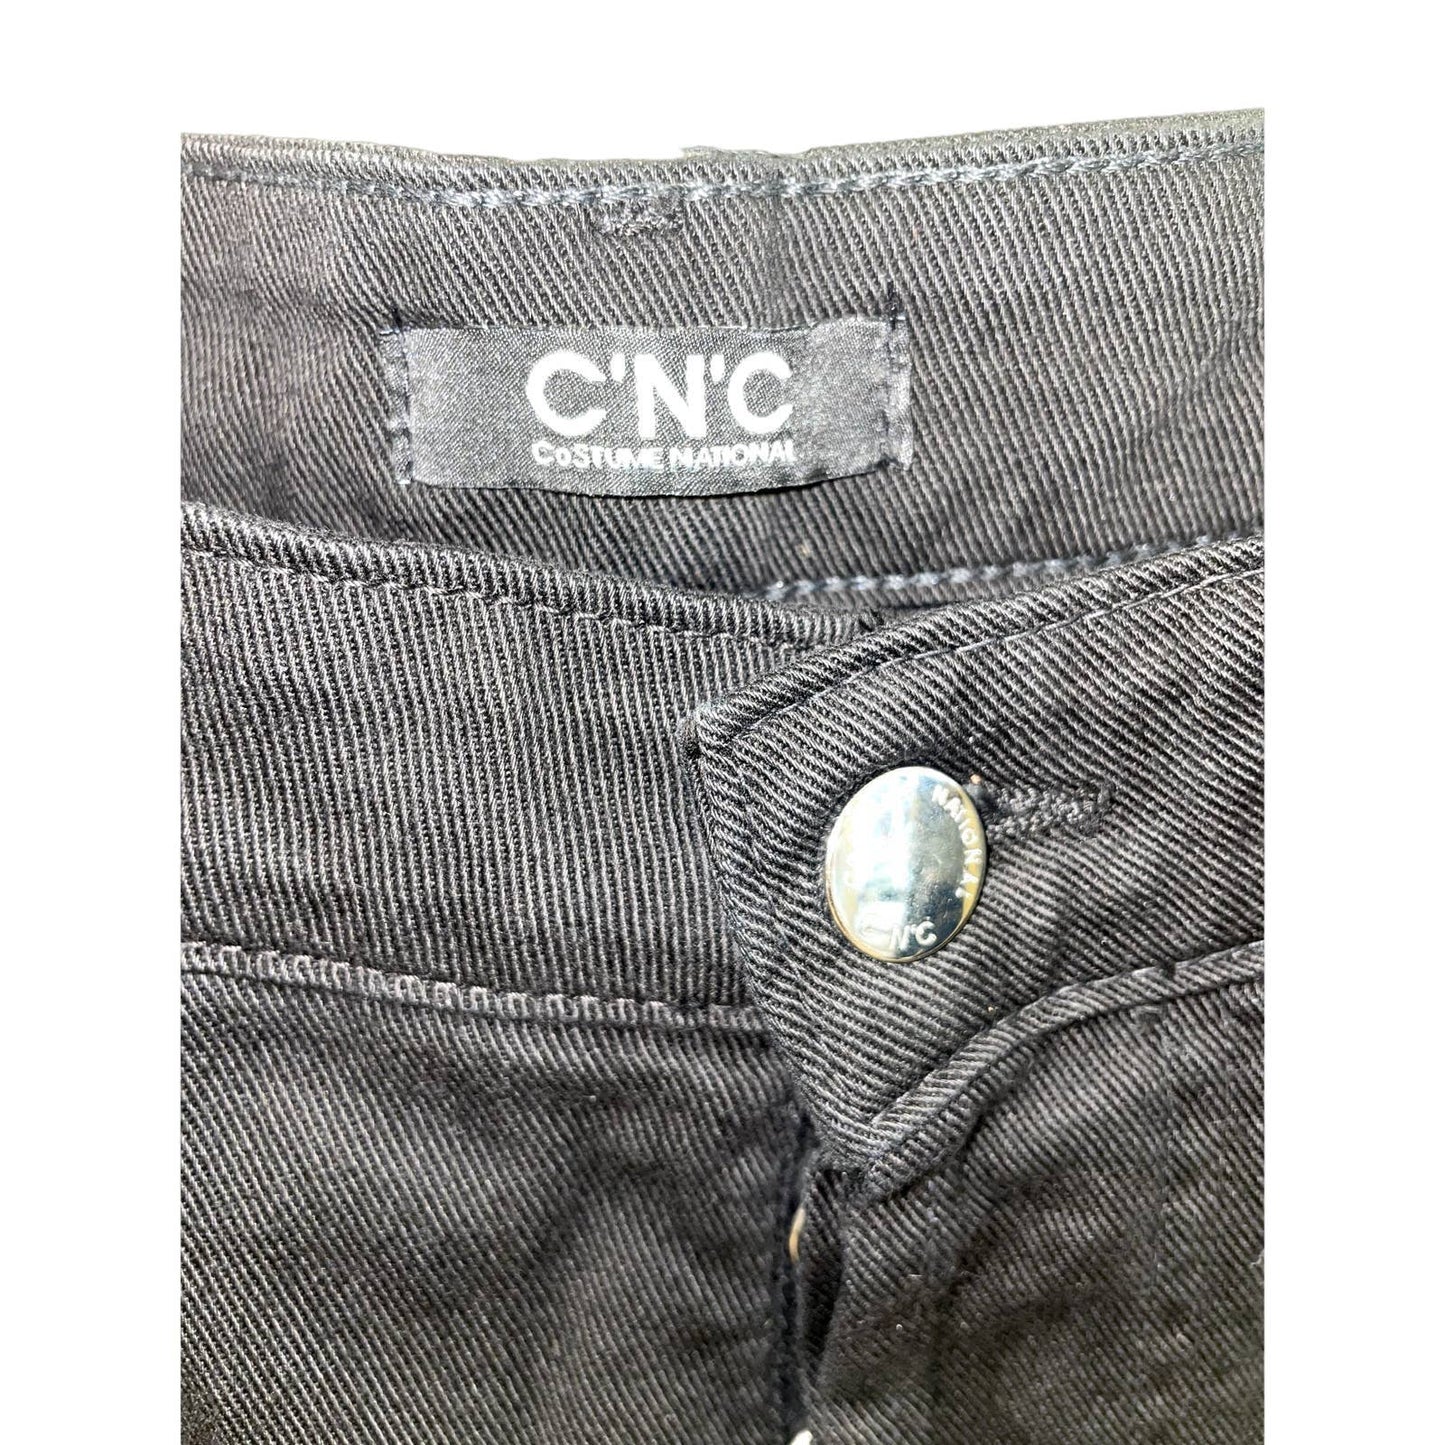 C N C COSTUME NATIONAL JEANS